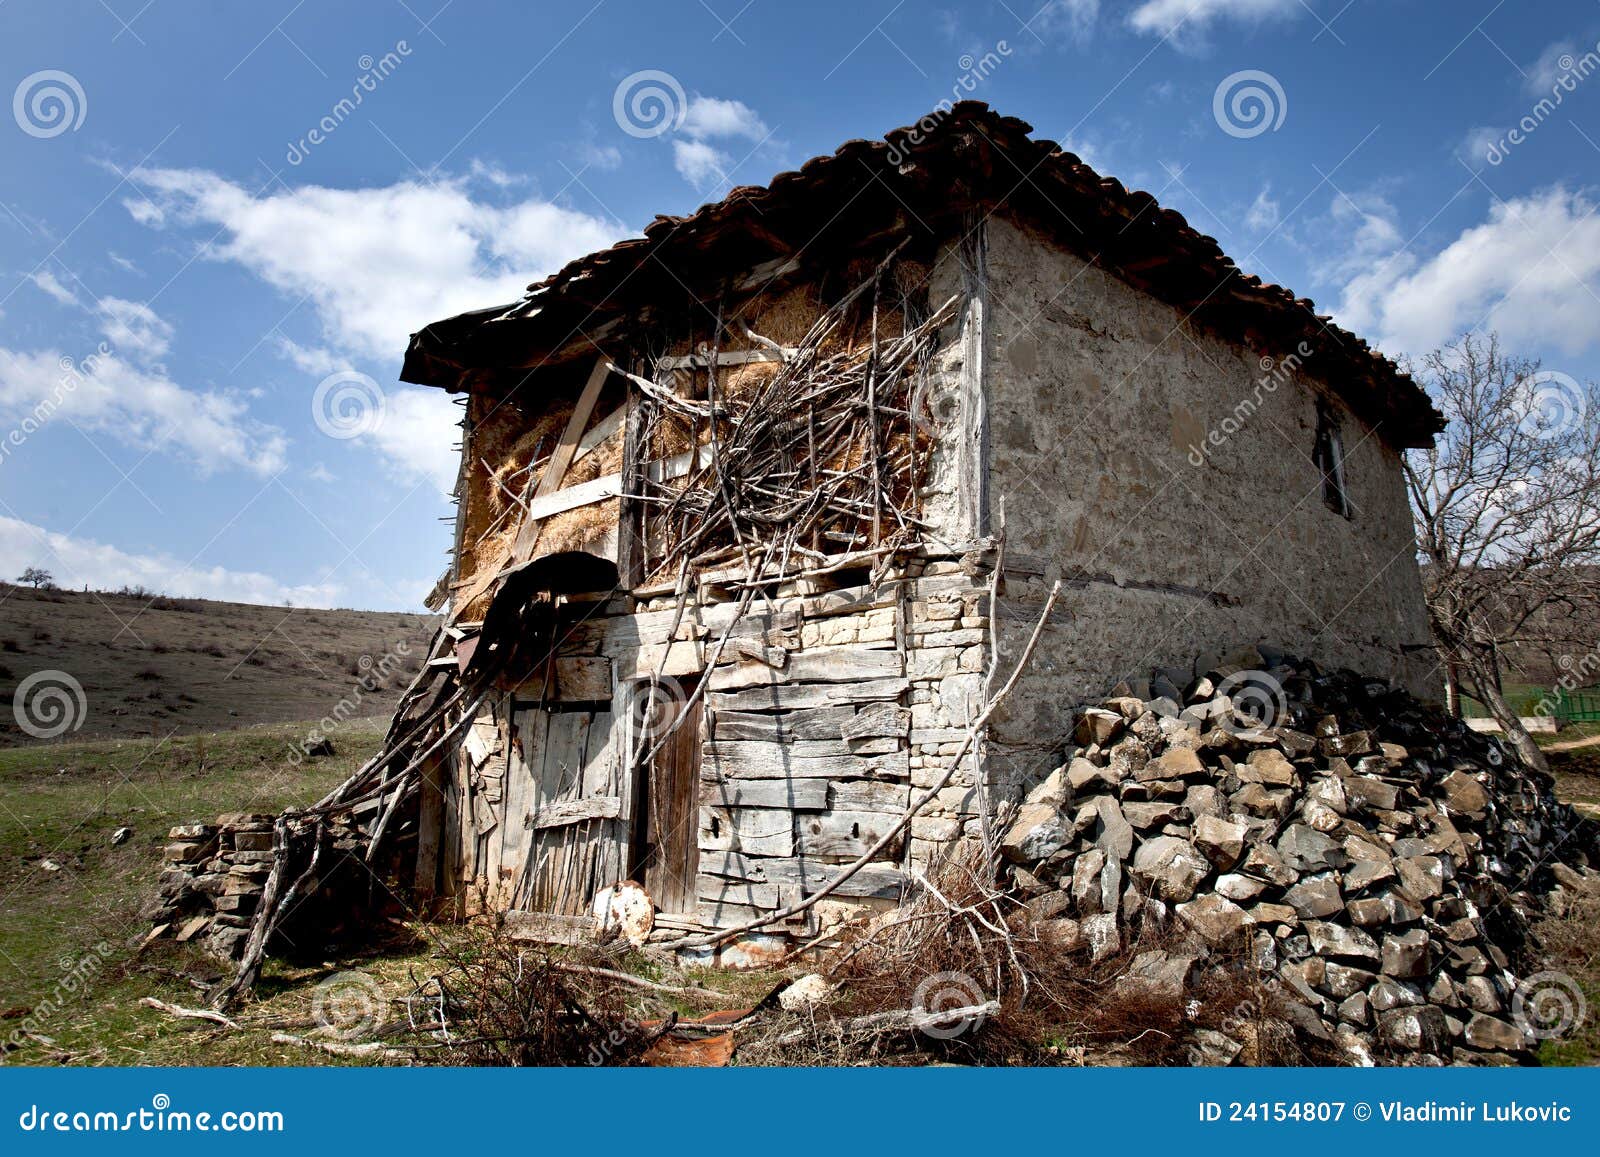 Old village house stock image. Image of remote, architecture - 24154807